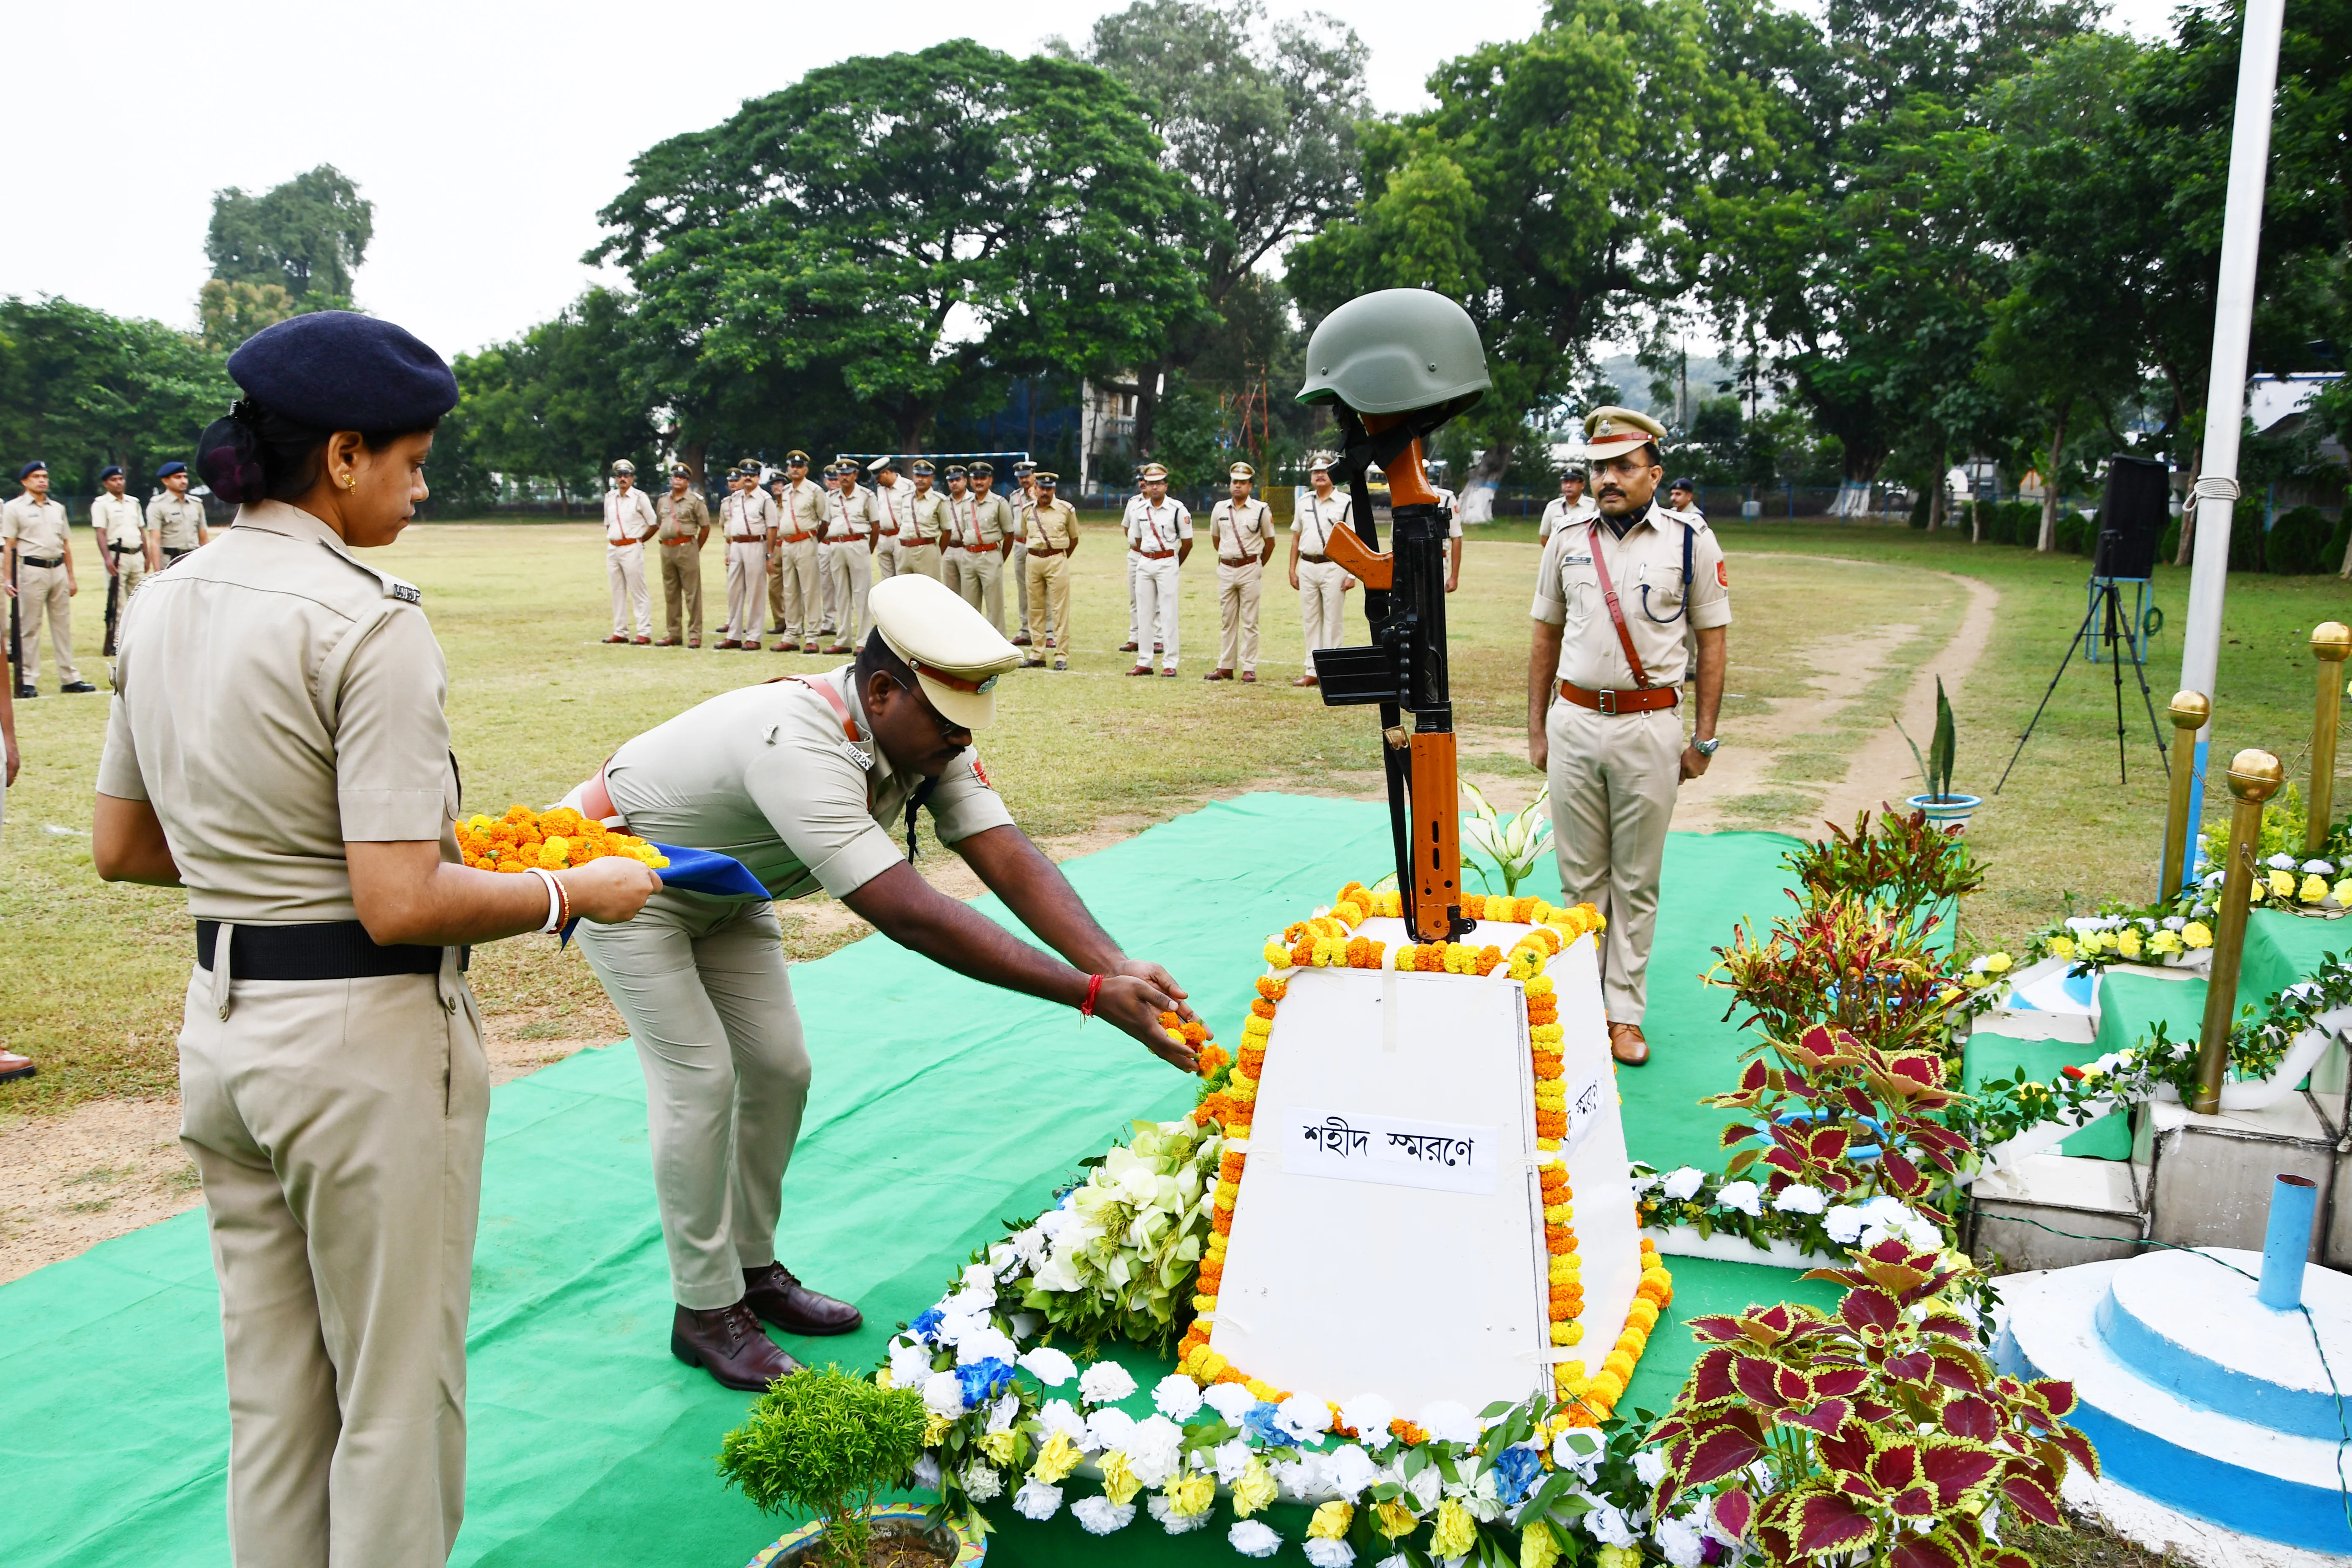 Police Commemoration Day | Quotes, Speech, Parade, Celebration